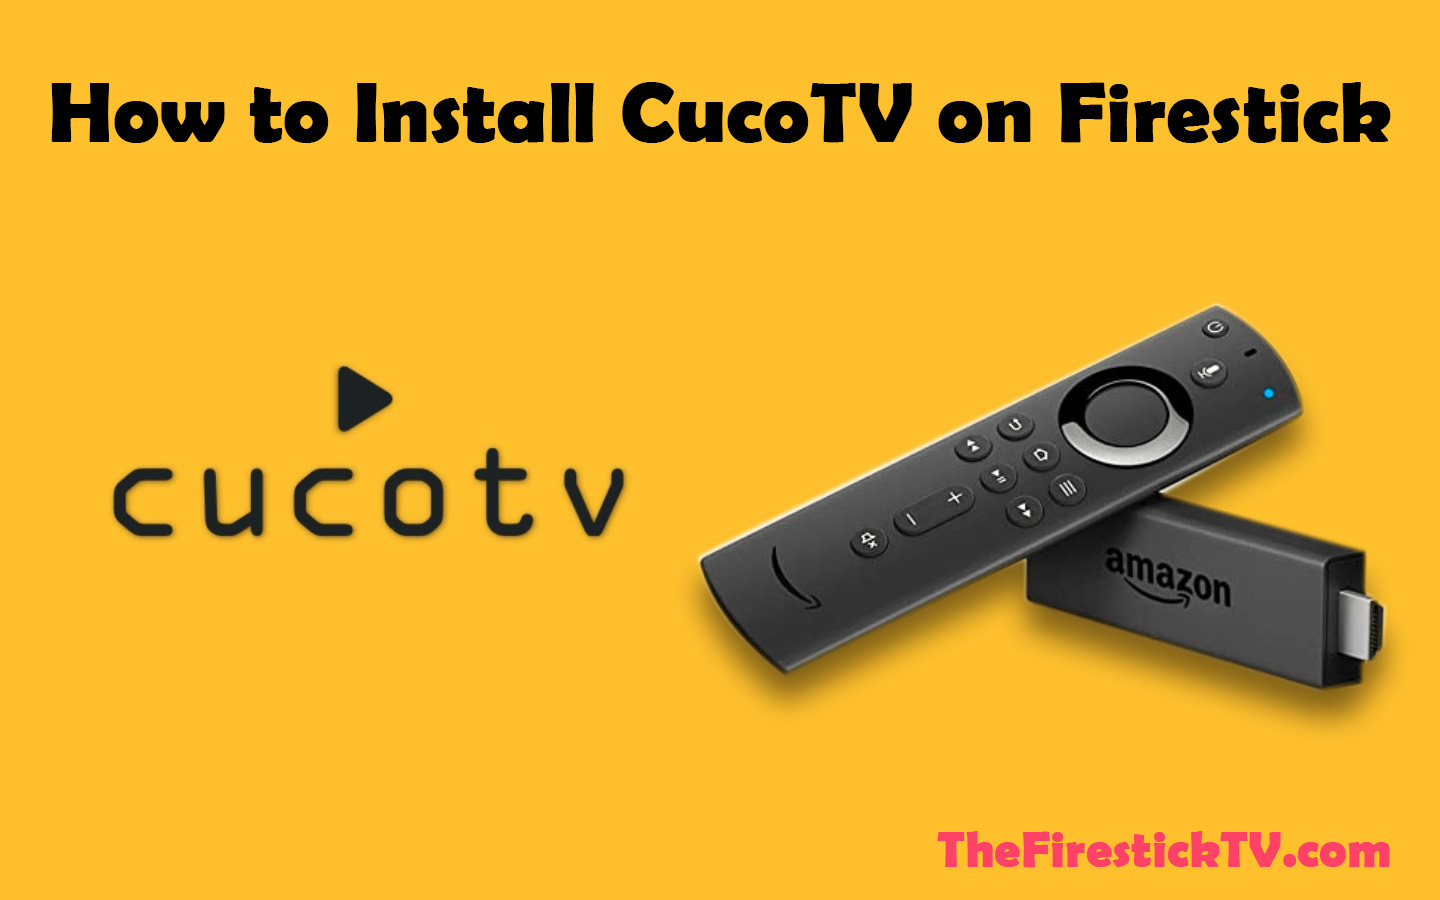 How to install CucoTV on firestick